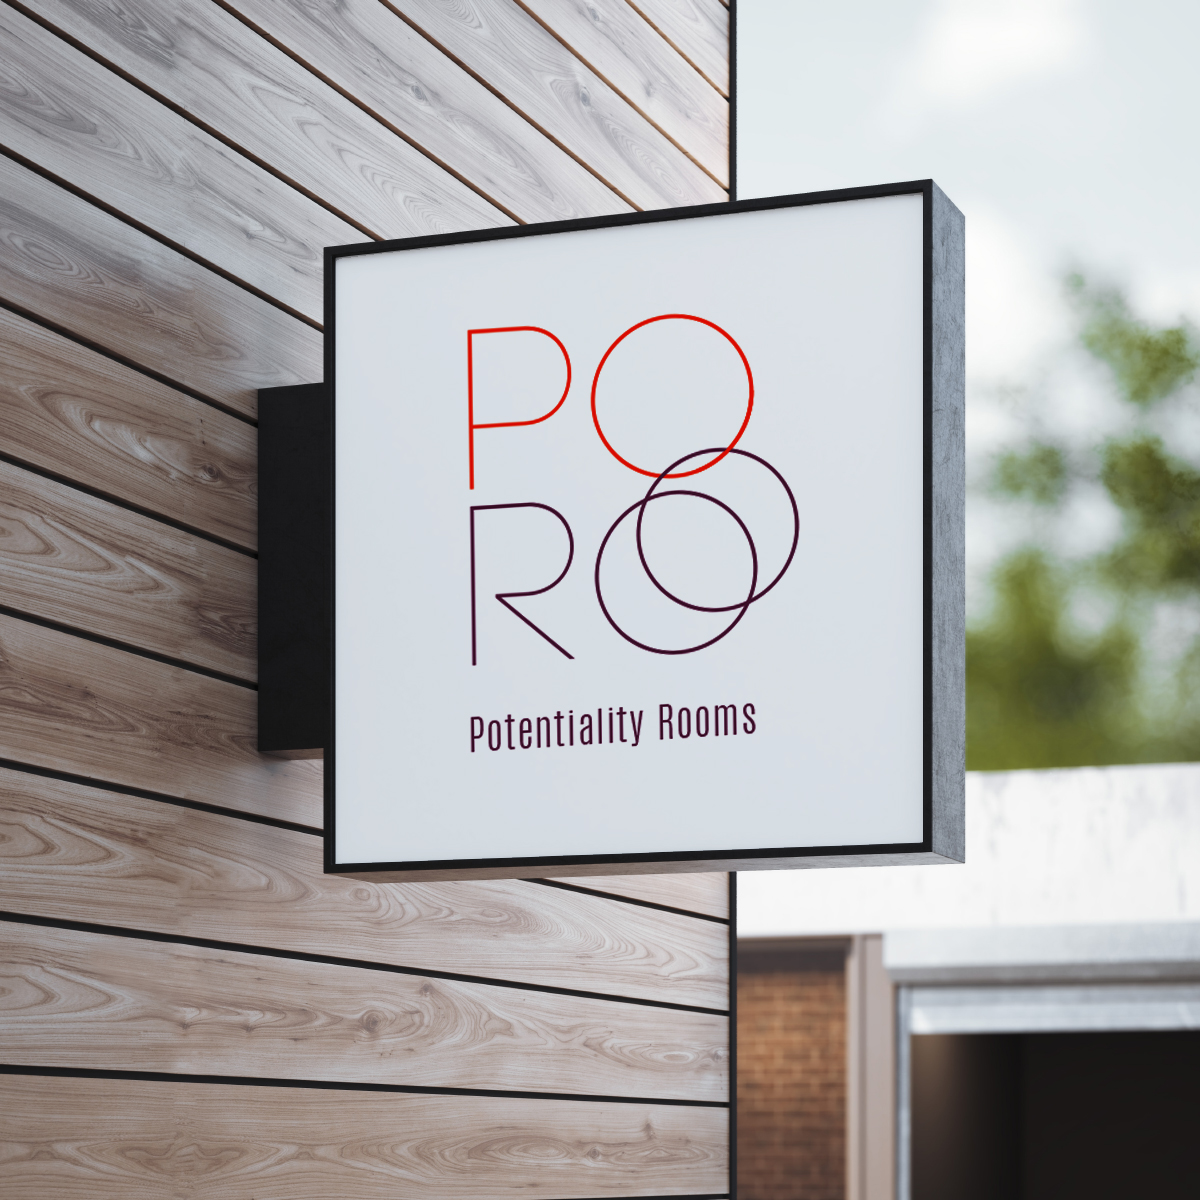 Poroo, Potential Rooms